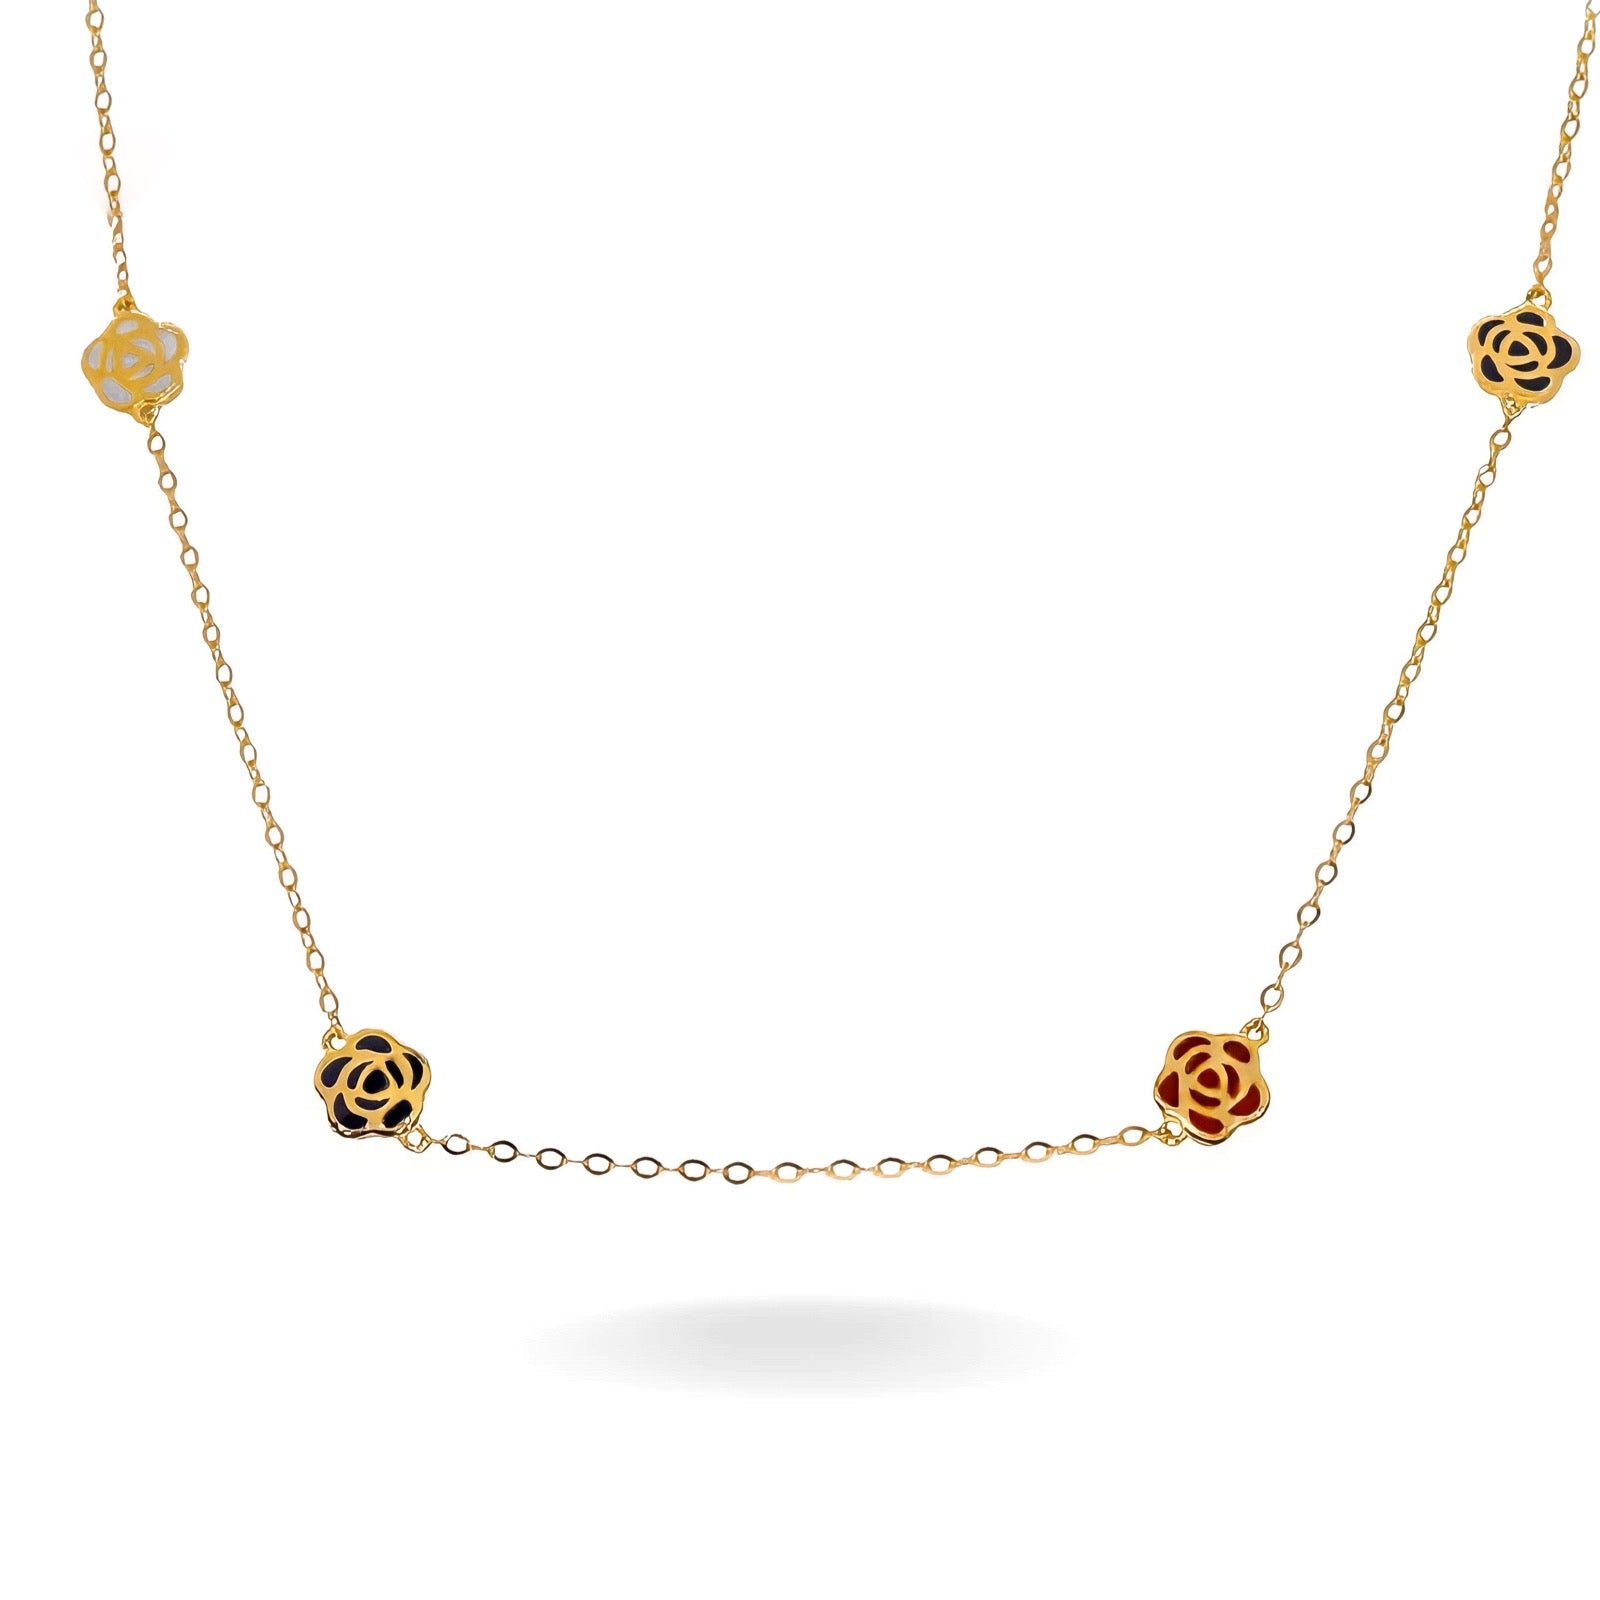 14K YELLOW GOLD ROSE BLOOM NECKLACE